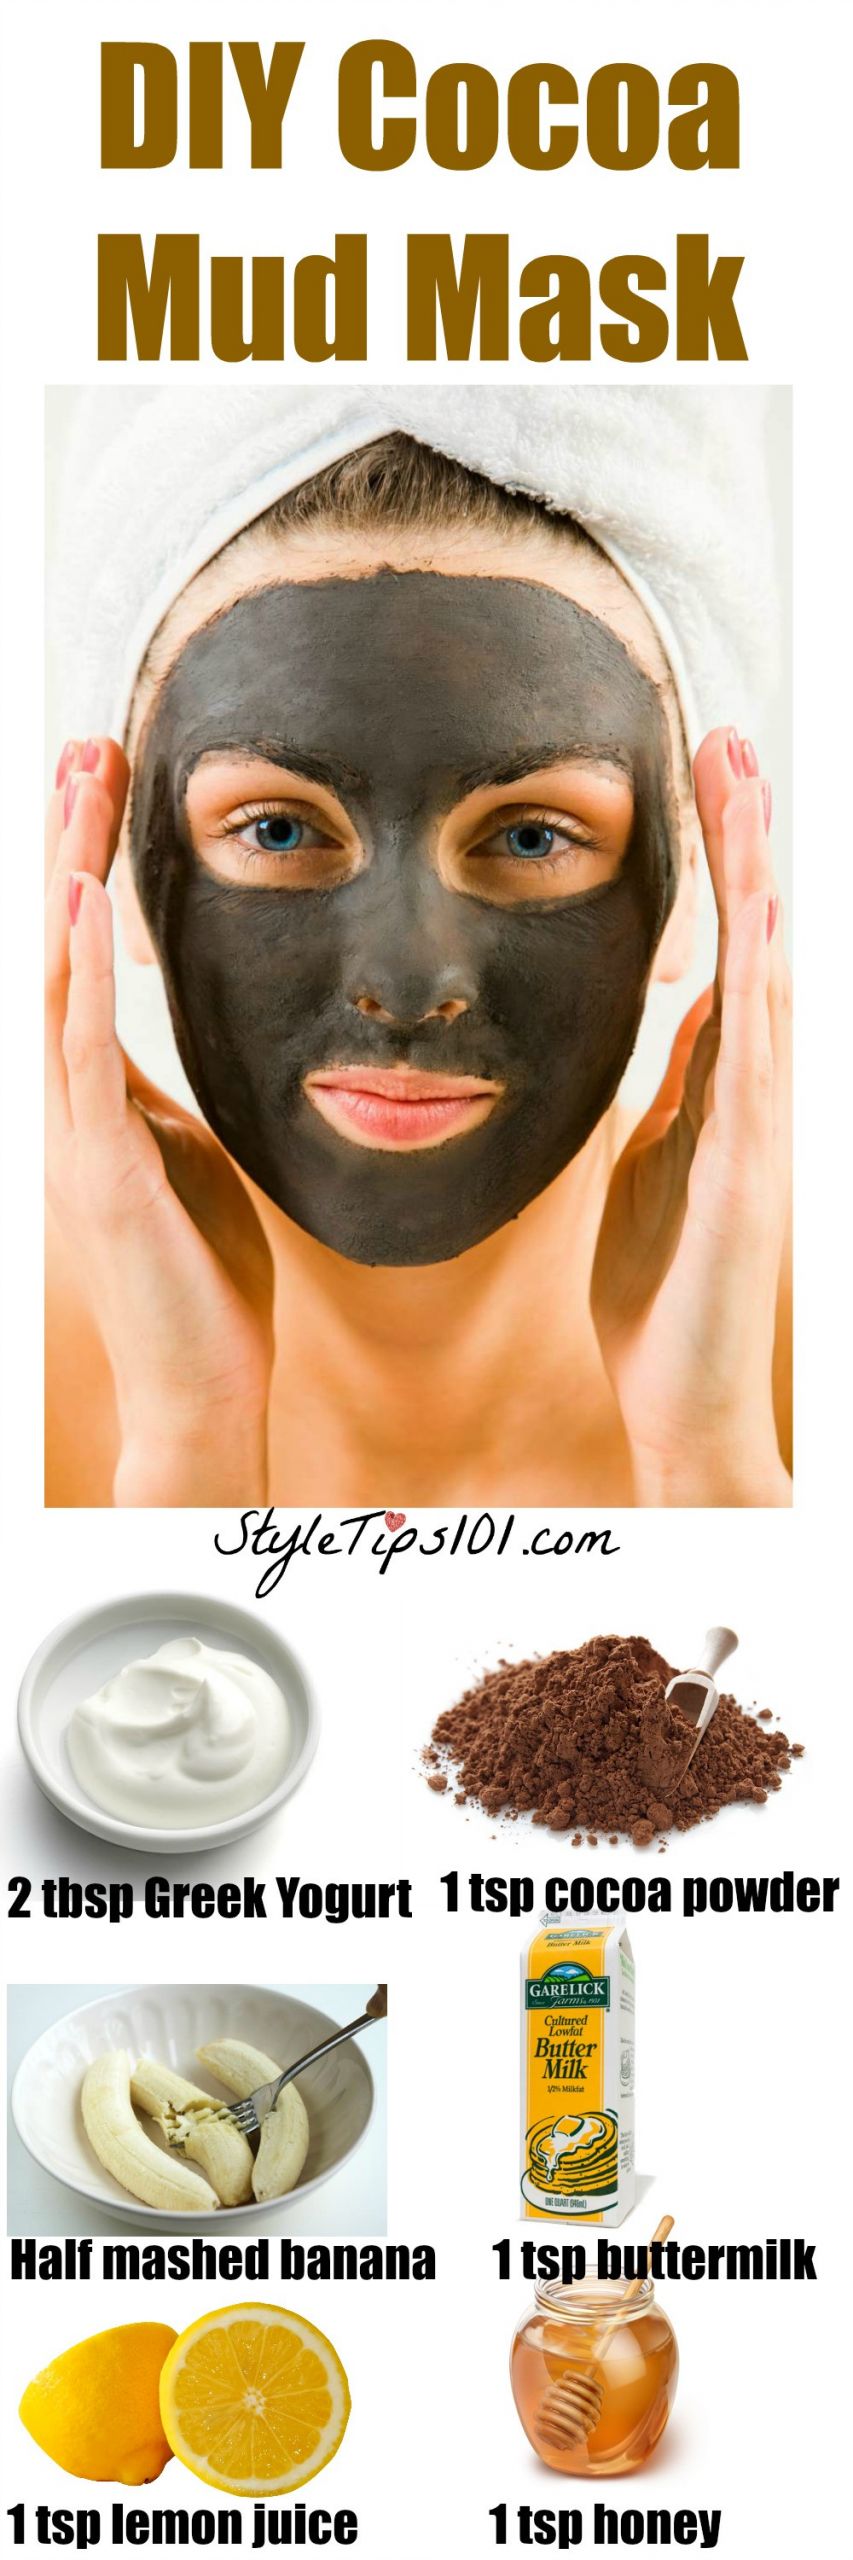 DIY Masks For Acne
 DIY Mud Mask For Acne Prone and Oily Skin